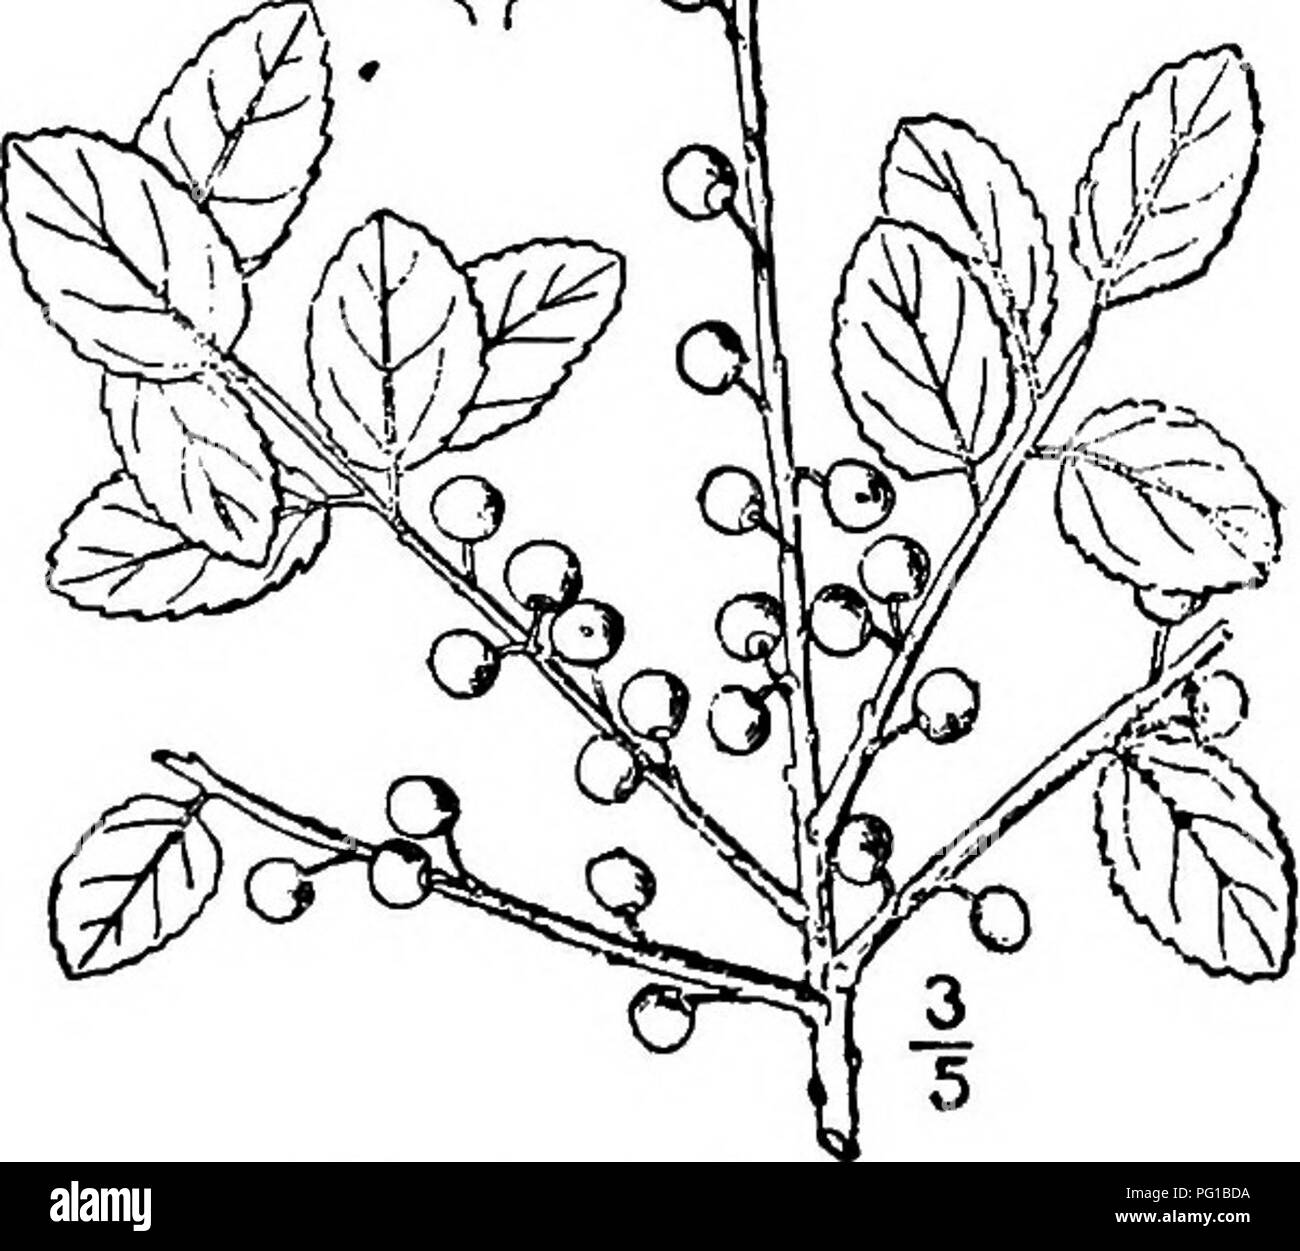 . North American trees : being descriptions and illustrations of the trees growing independently of cultivation in North America, north of Mexico and the West Indies . Trees. Fig. 578. —Krug's Holly. 9. KRUG'S HOLLY—Hex Kriigiana Loesener This West Indian evergreen tree has recently been discovered in southern peninsular Florida by Dr. J. K. Small and Mr. Percy Wilson, growing in rich hammocks south of Miami, attaining a height of about 15 meters, with a trunk diameter of 3 dm. In the Bahamas it is called Whitewood and it grows also in Haiti. The twigs are round, gray, becoming white. The bark Stock Photo